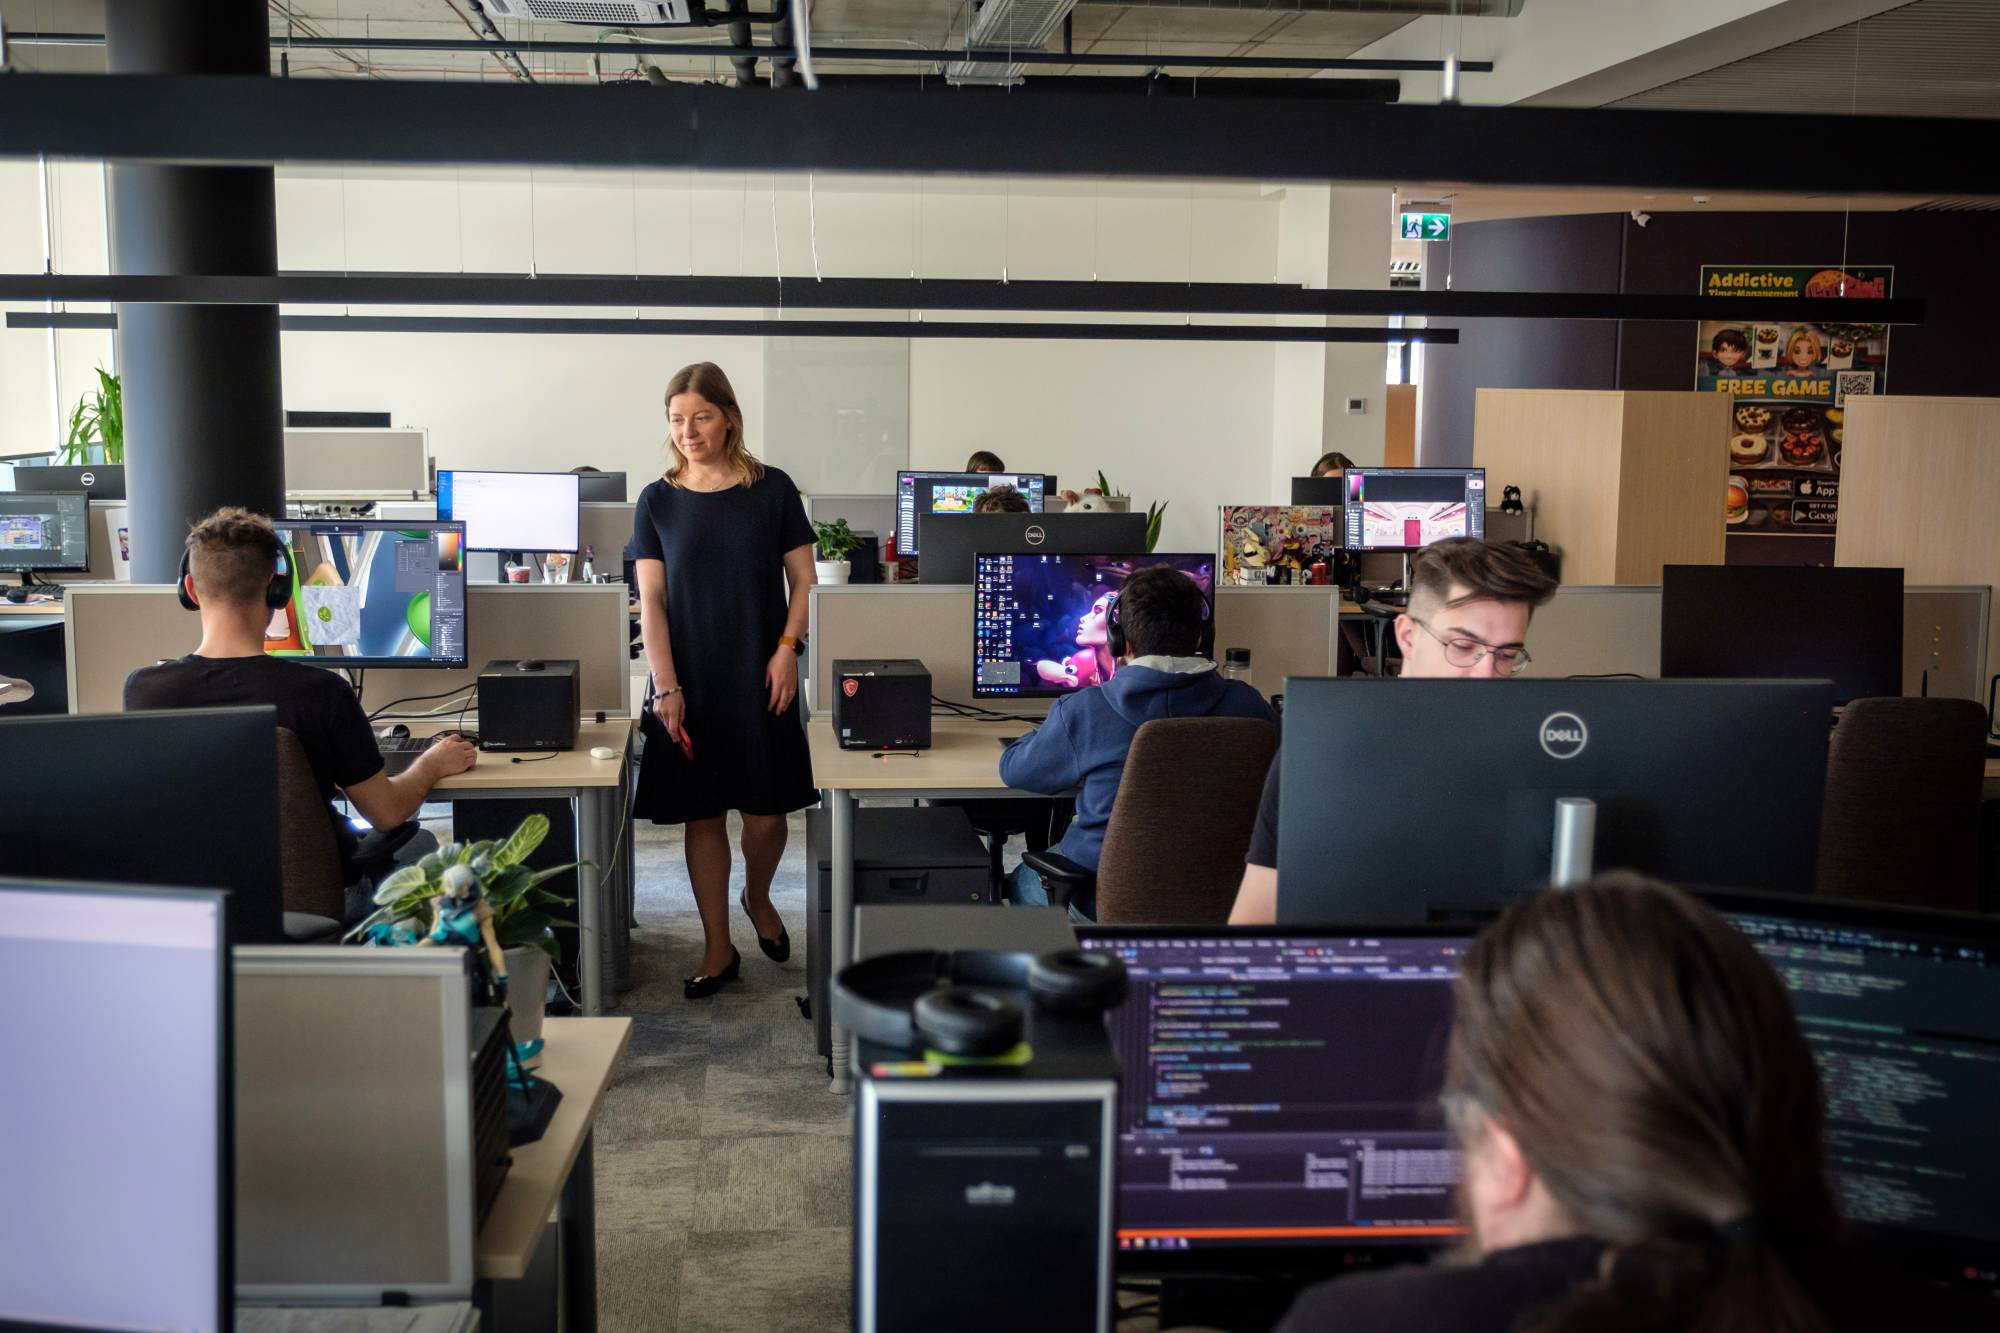 Victoria Trofimova, chief executive of the game-maker Nordcurrent, at the company’s headquarters in Vilnius, Lithuania, on May 23. She arranged for the safe passage of 51 people out of Ukraine. | GORDON WELTERS / THE NEW YORK TIMES